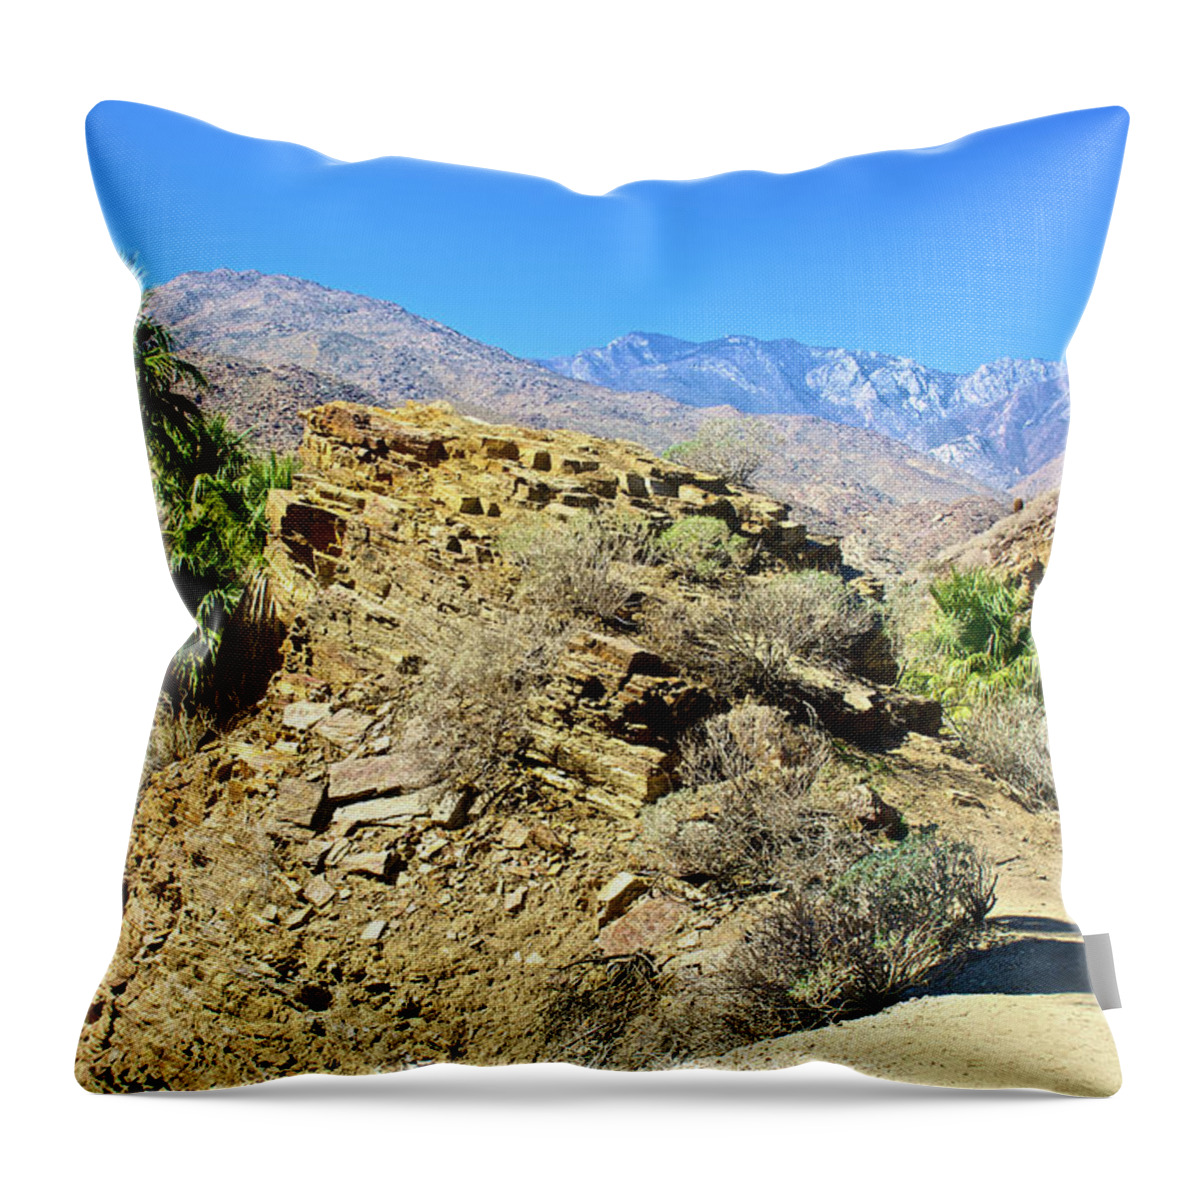 Lower Palm Canyon From Beginning Of Fern Trail In Indian Canyons Near Palm Springs Throw Pillow featuring the photograph Lower Palm Canyon Trail in Indian Canyons near Palm Springs, California #2 by Ruth Hager